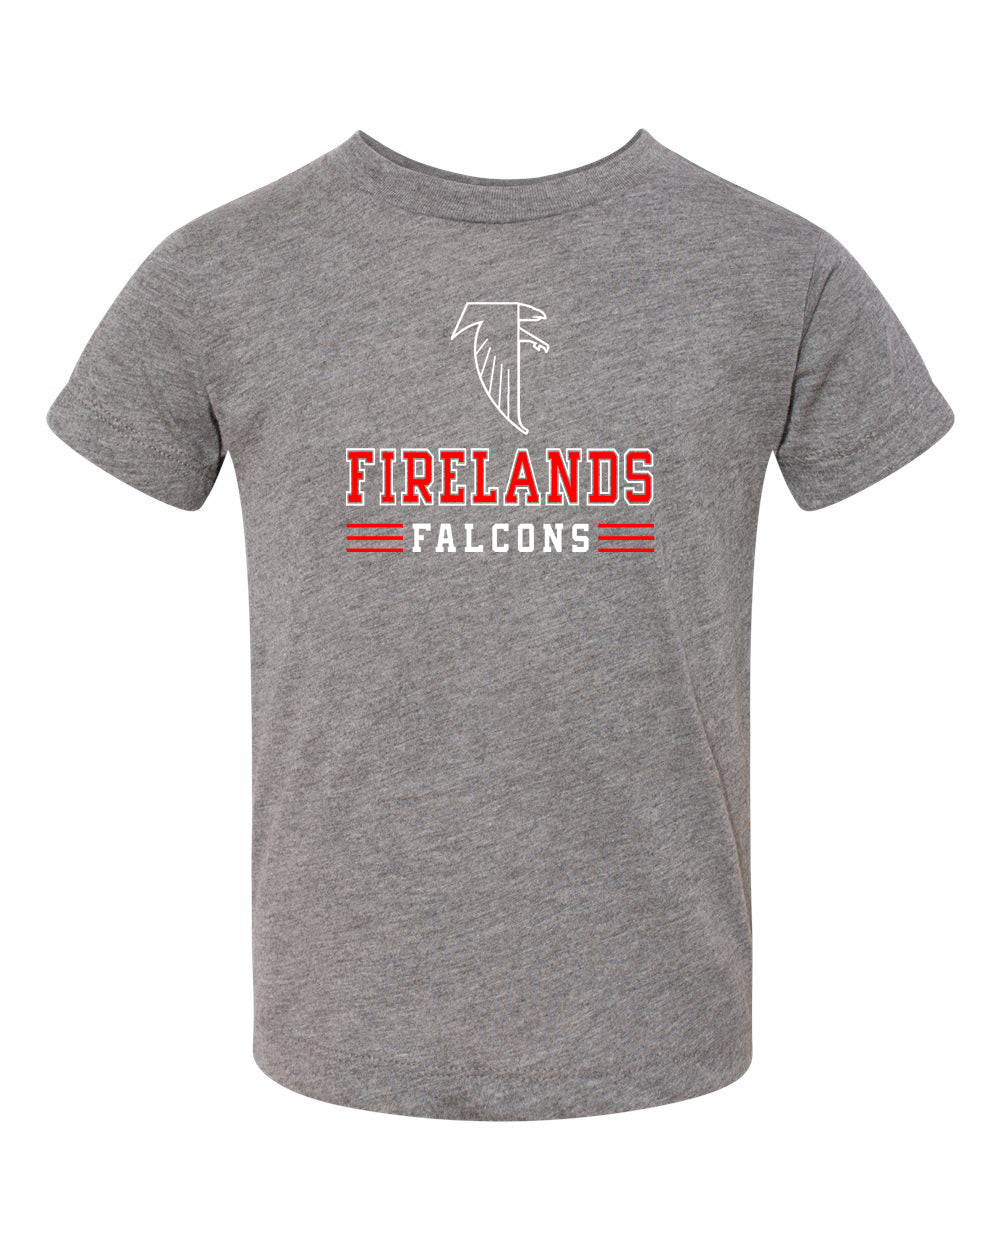 Youth - Firelands Falcons - Tee - Mistakes on the Lake